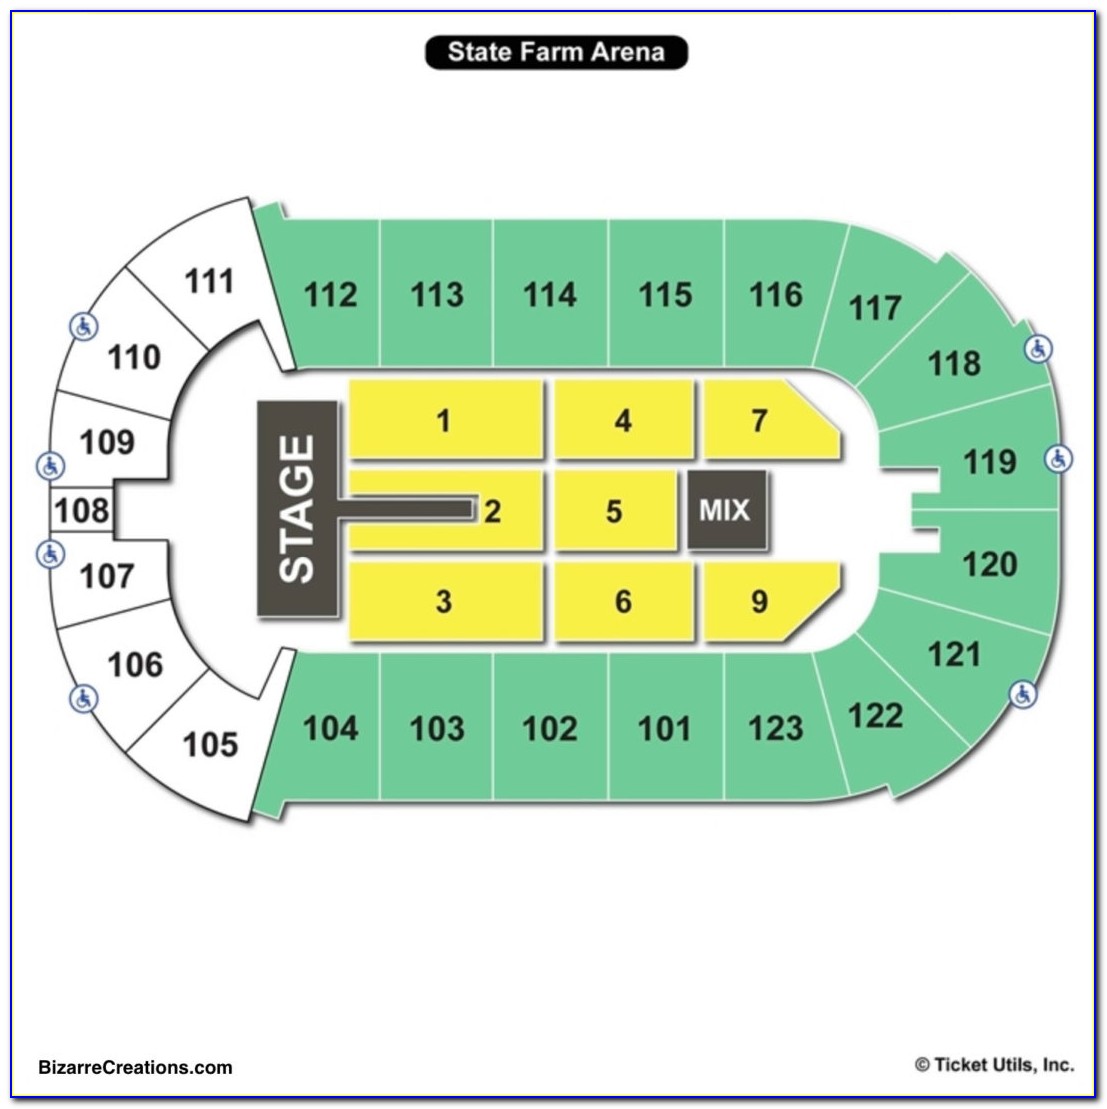 State Farm Arena Seating Map